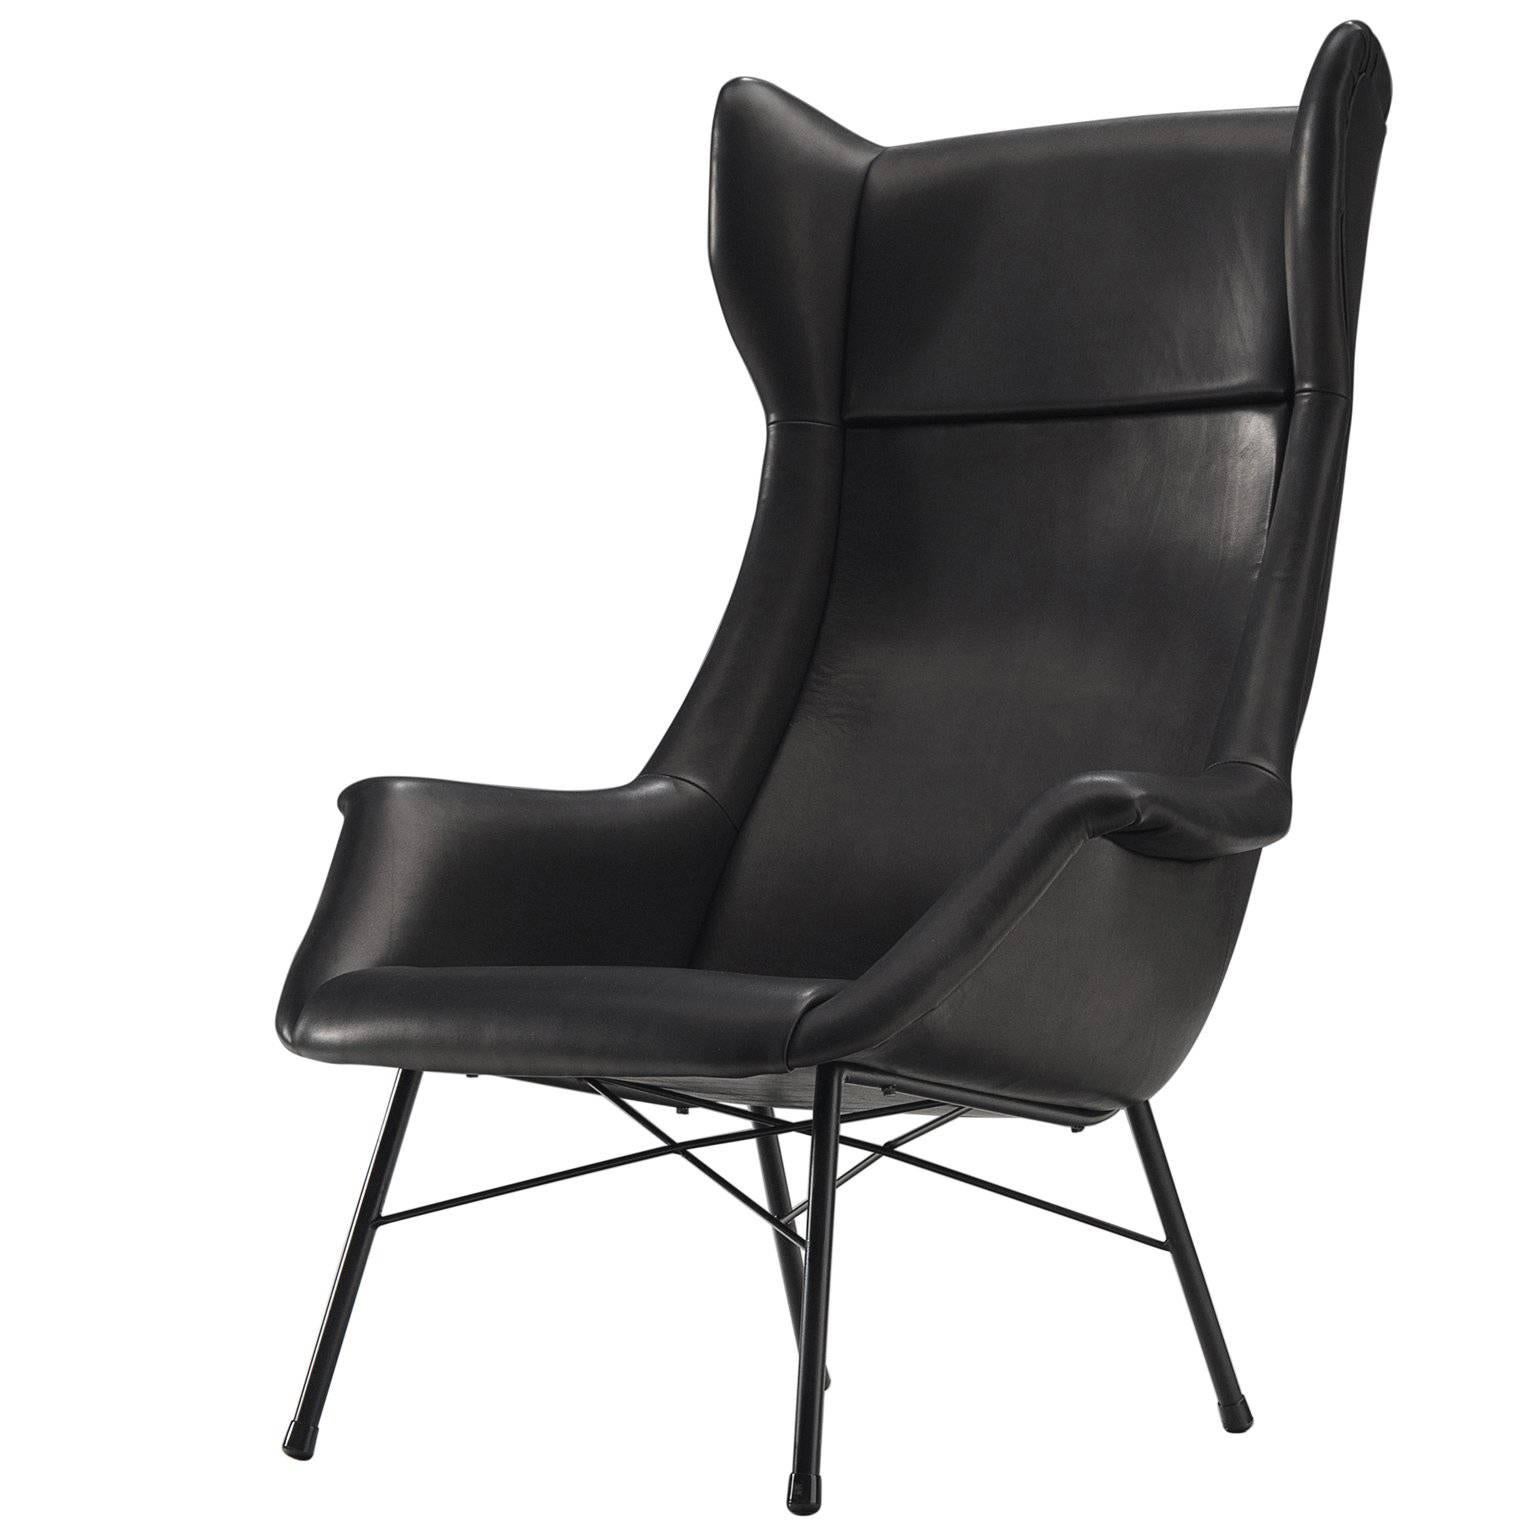 Customized Midcentury Leather Lounge Chair